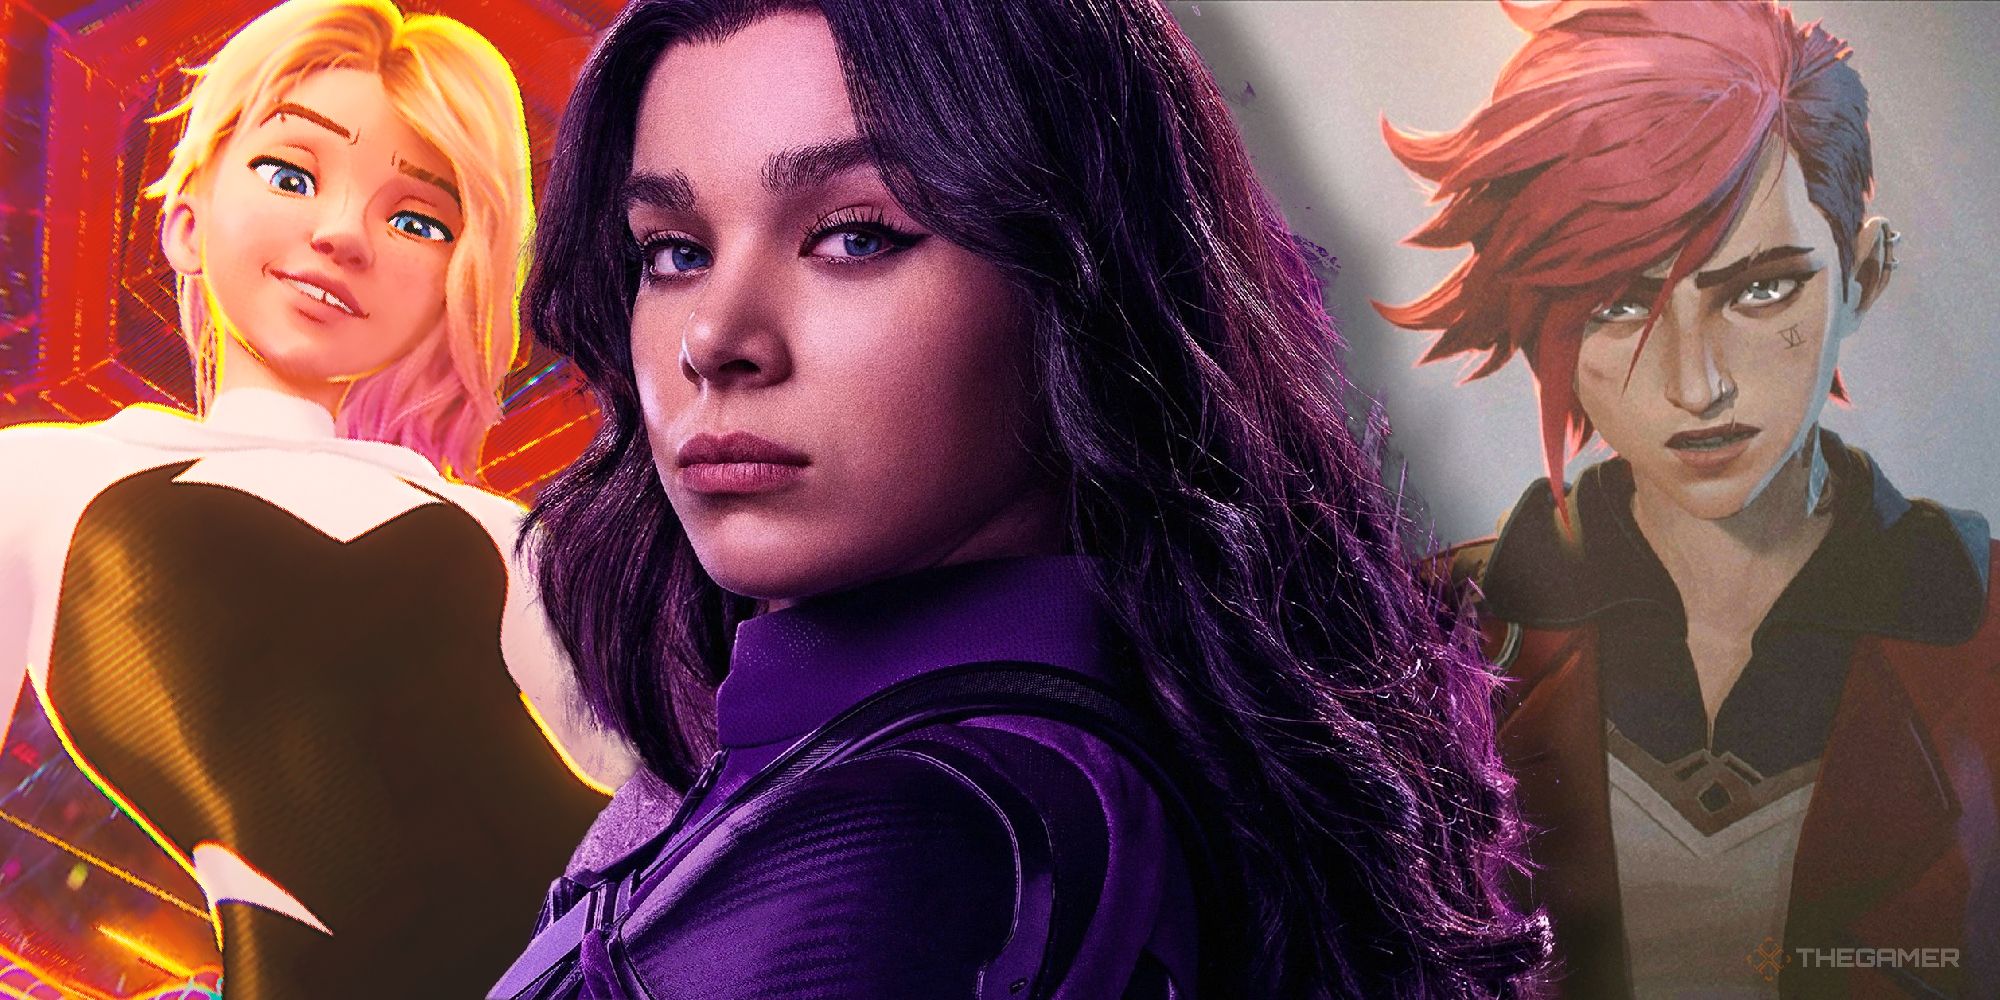 Hailee Steinfeld as Kate Bishop, Vi, and Gwen Stacy